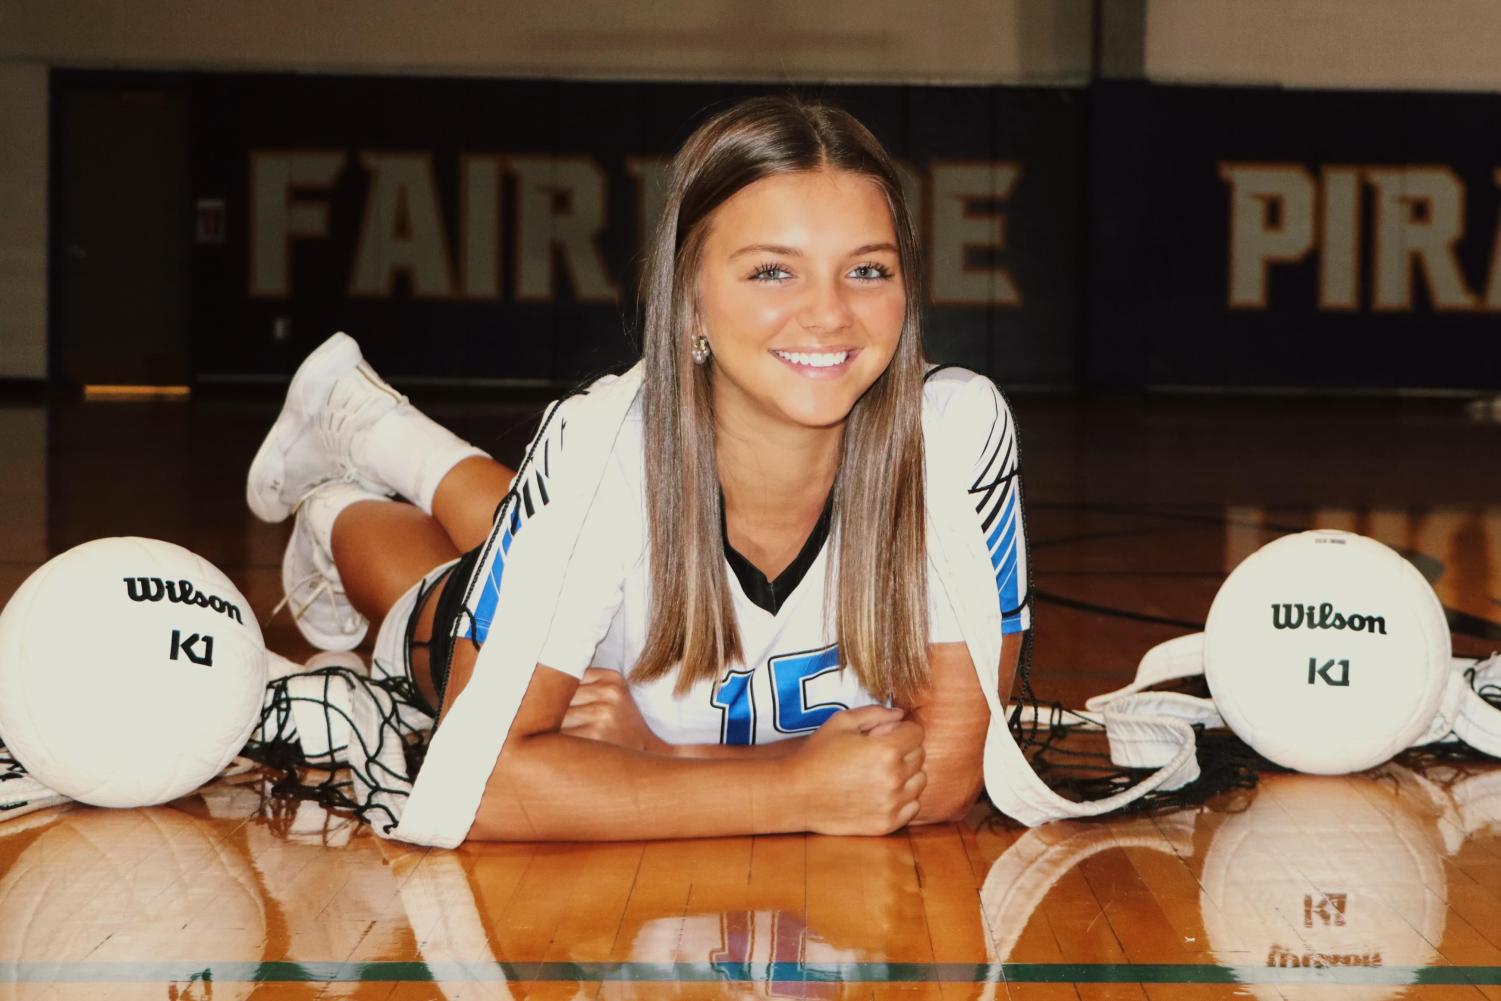 Photo poses #VOLLEYBALL | Volleyball poses, Sport portraits, Sports pictures